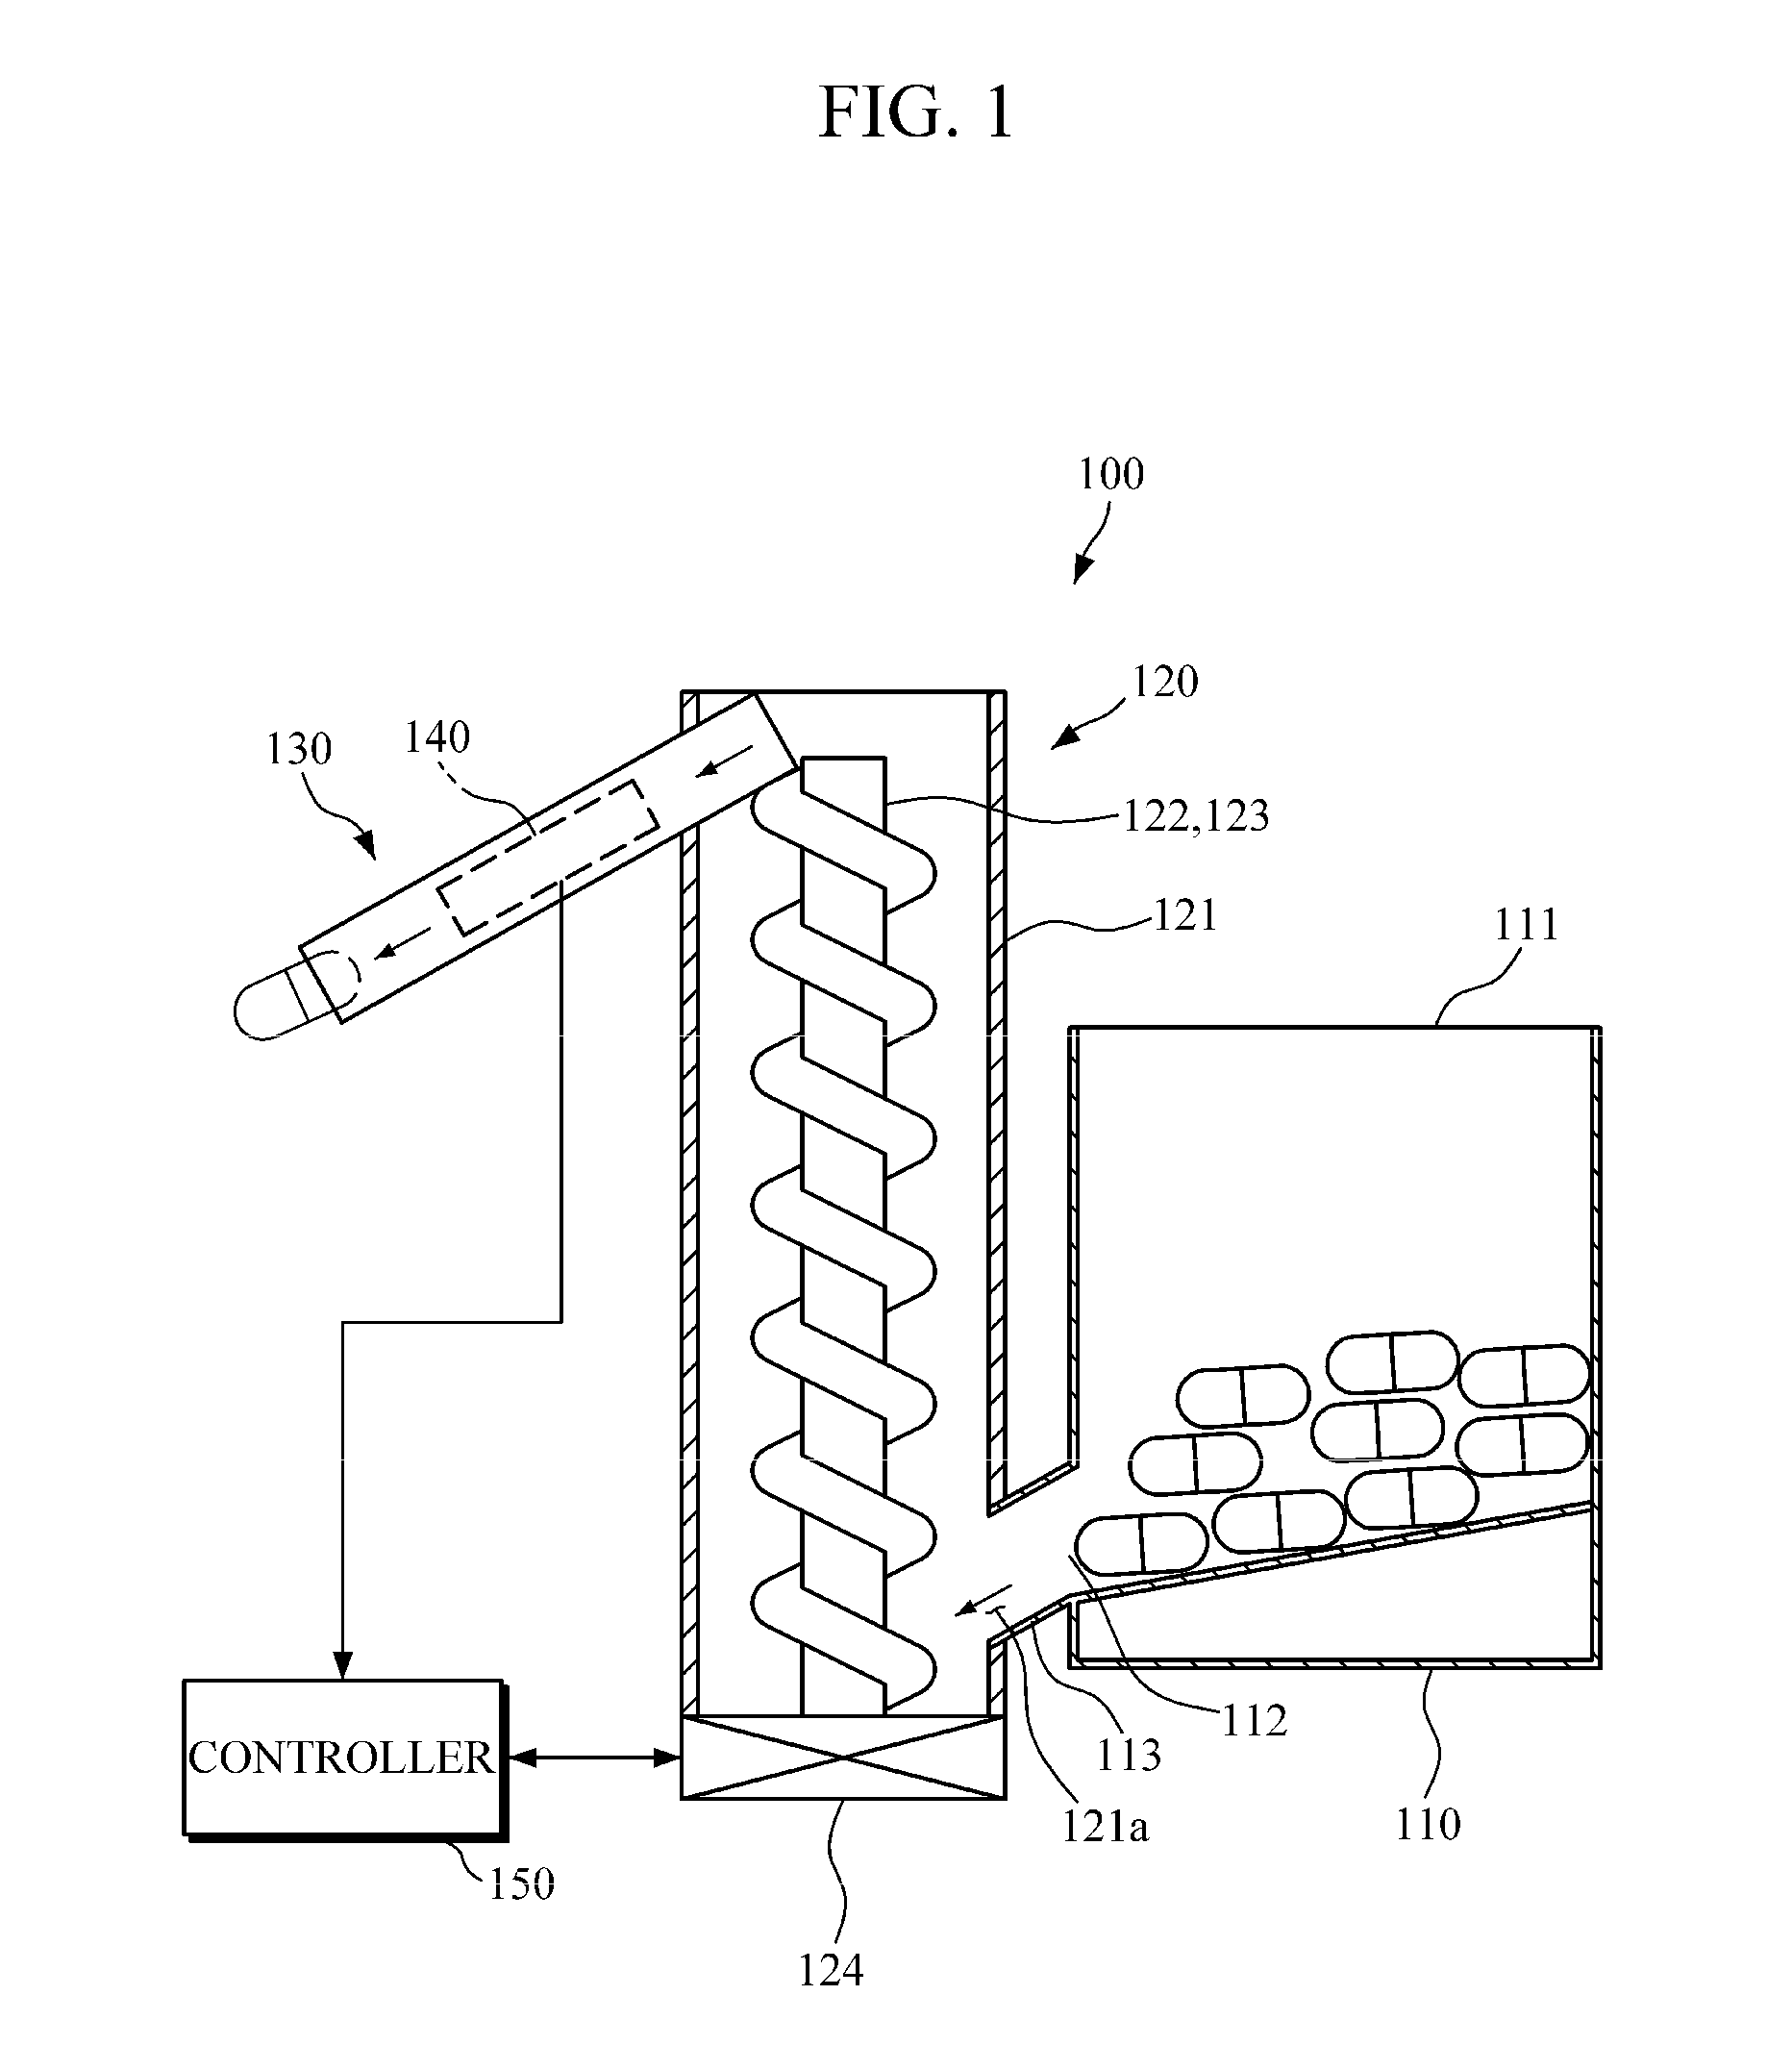 Atypical pill dispensing apparatus